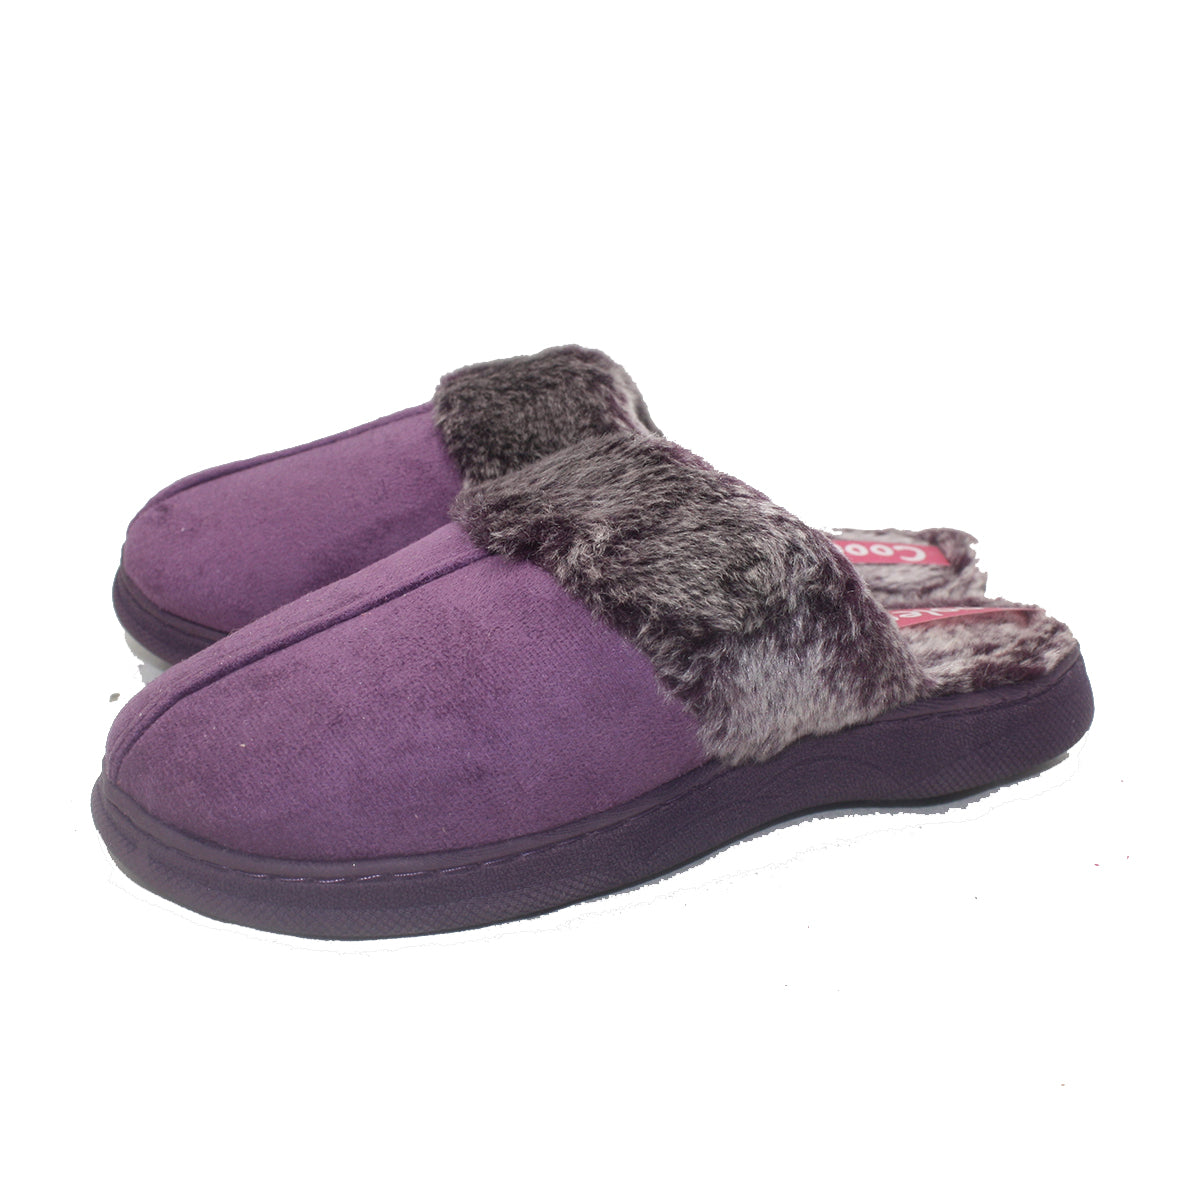 Purple suedette open back slippers with fur cuff